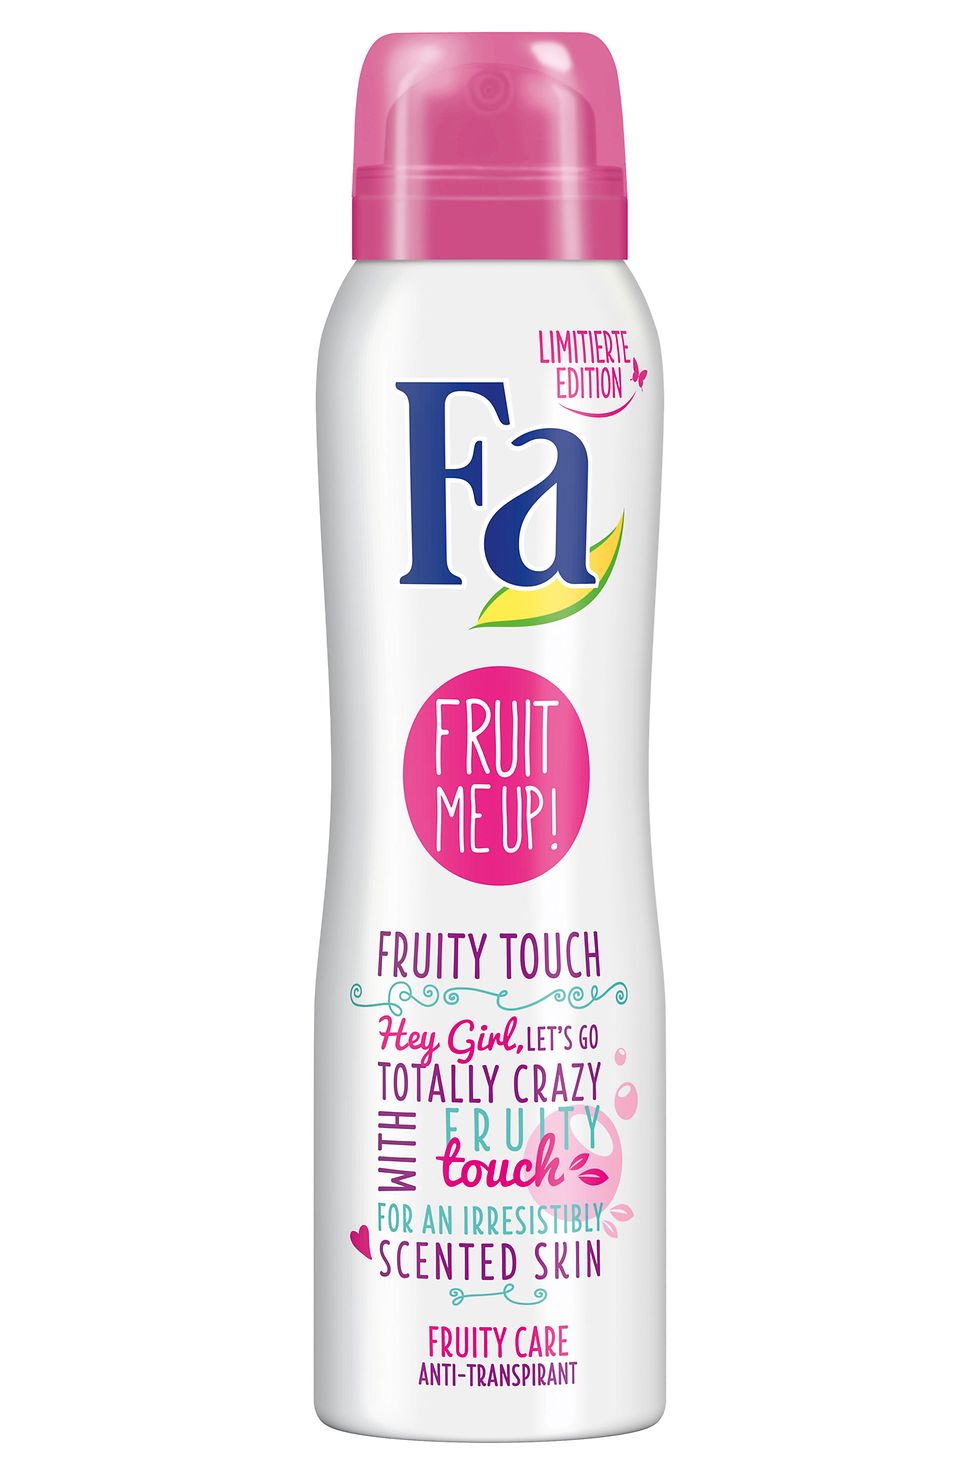 Fa Fruit me up! Fruity Touch Anti-Transpirant